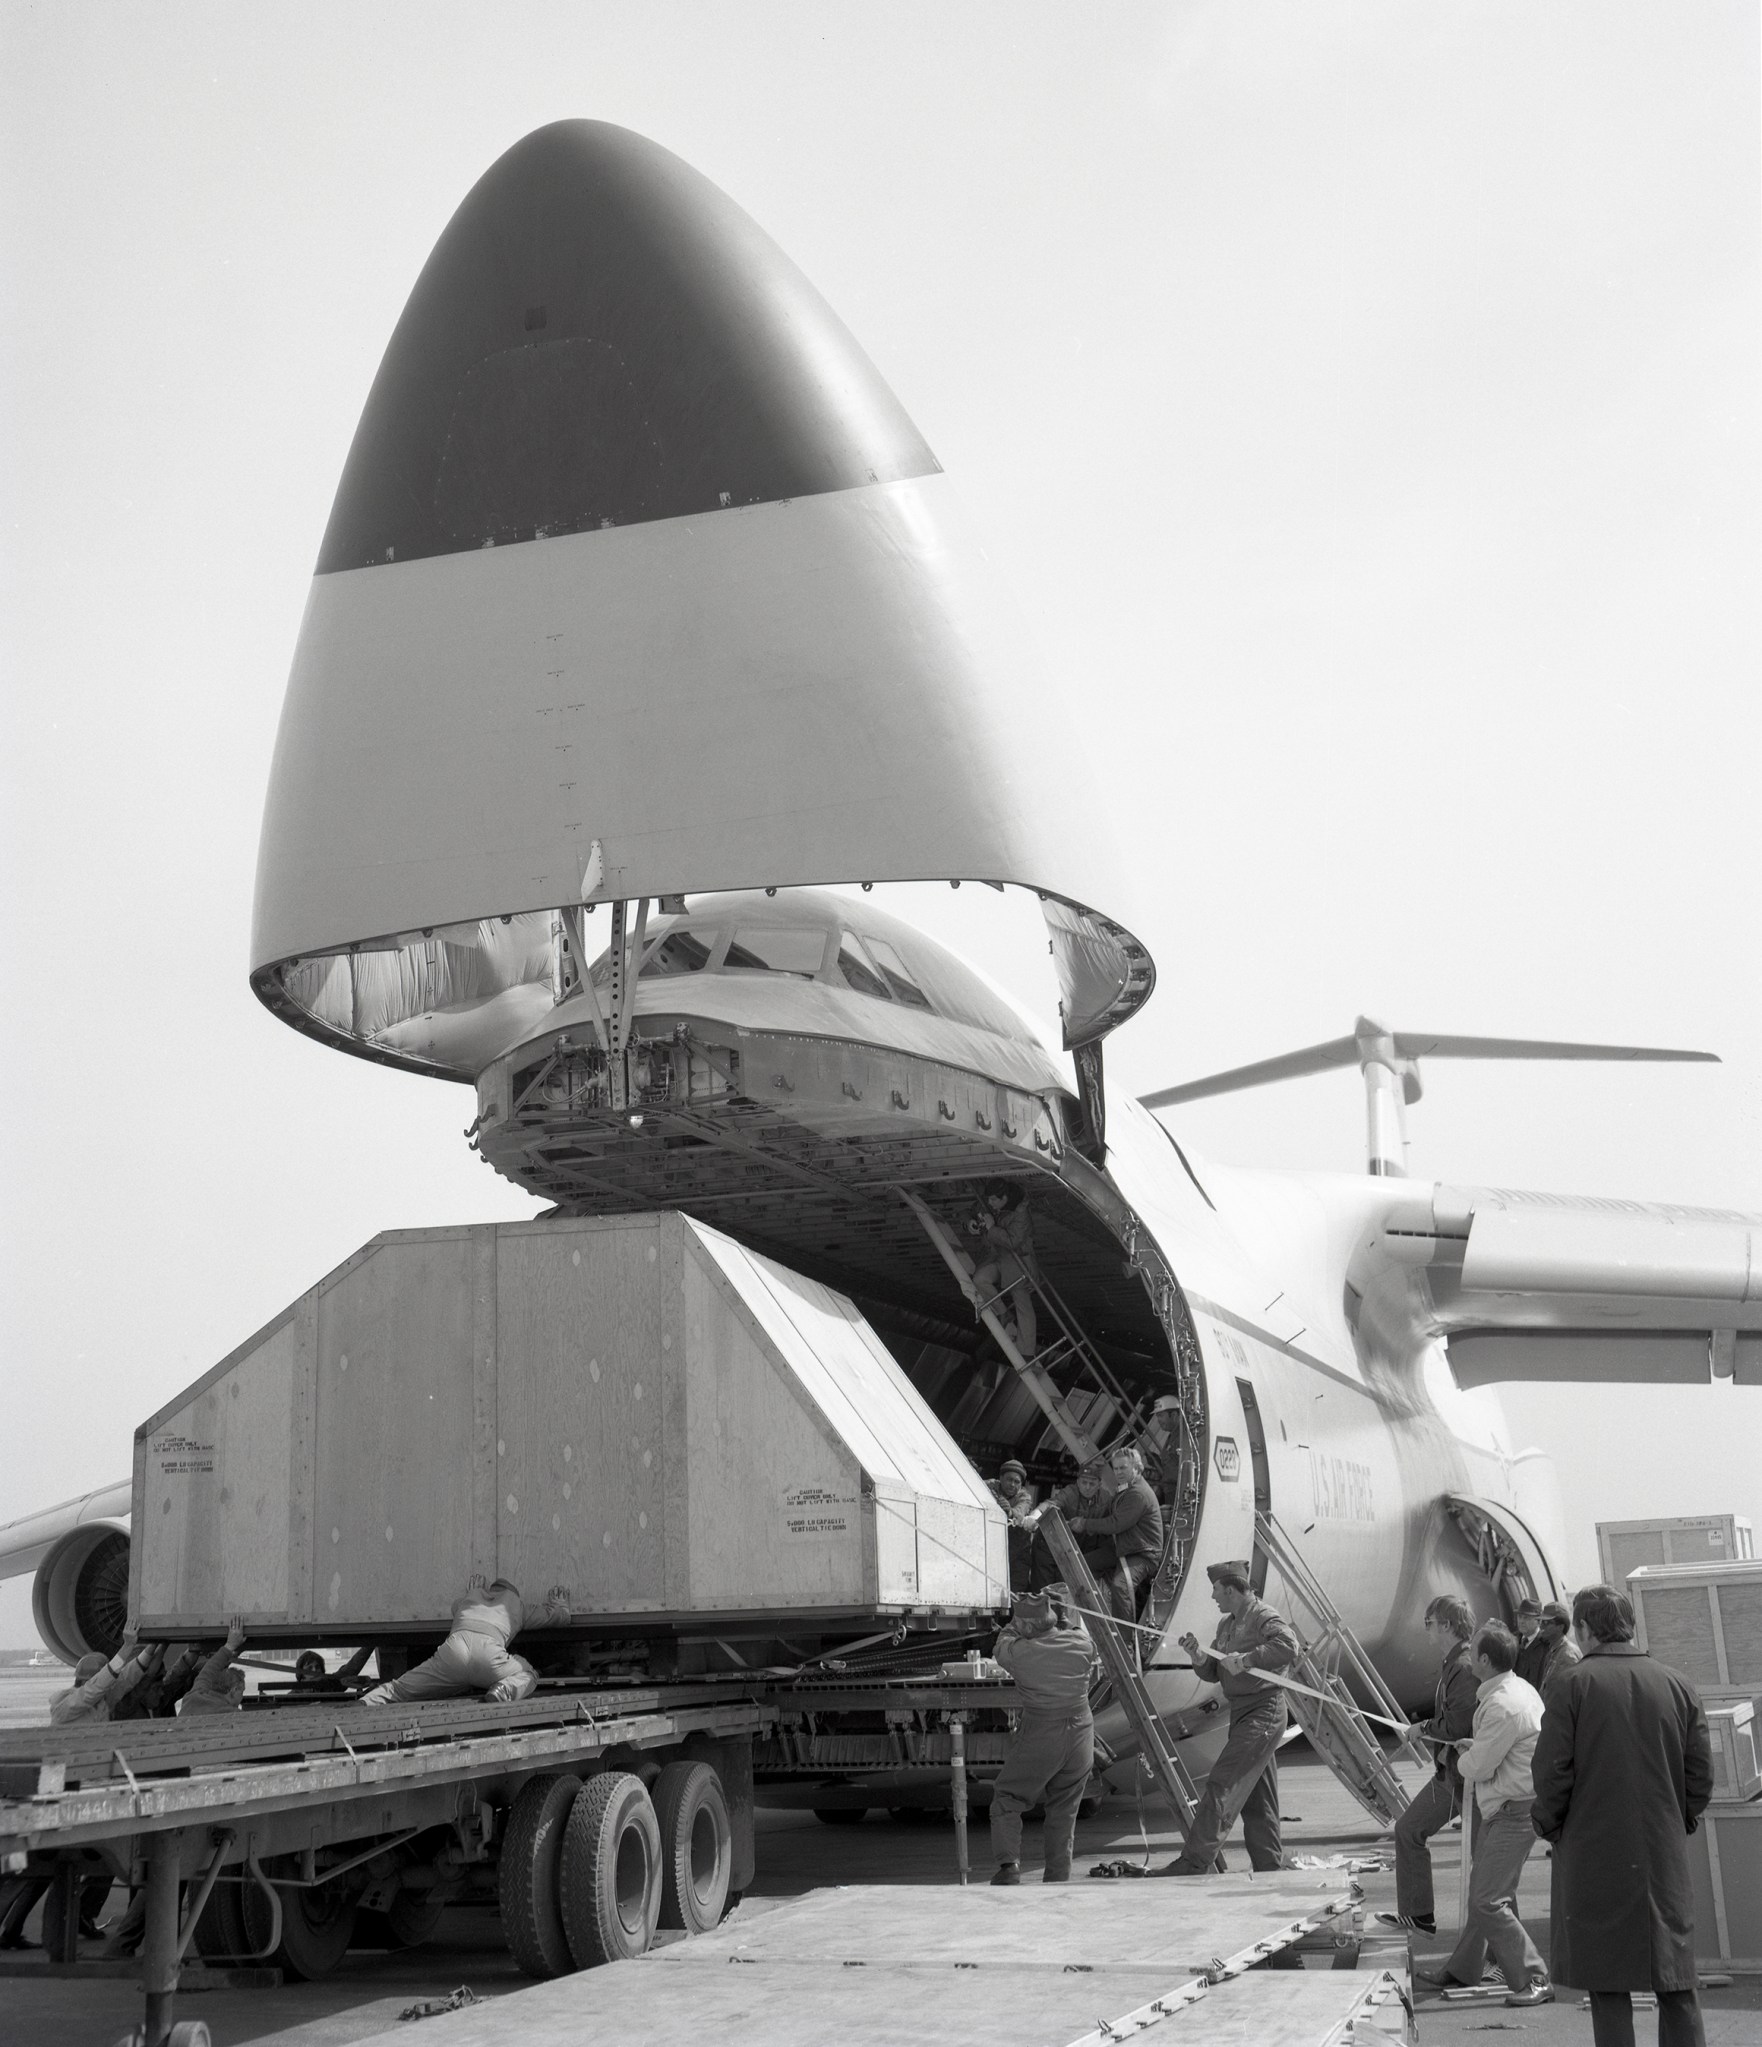 Hinged nose of large airplane is tilted up revealing a large wooden crate. Workers poised to remove to a flatbed truck.